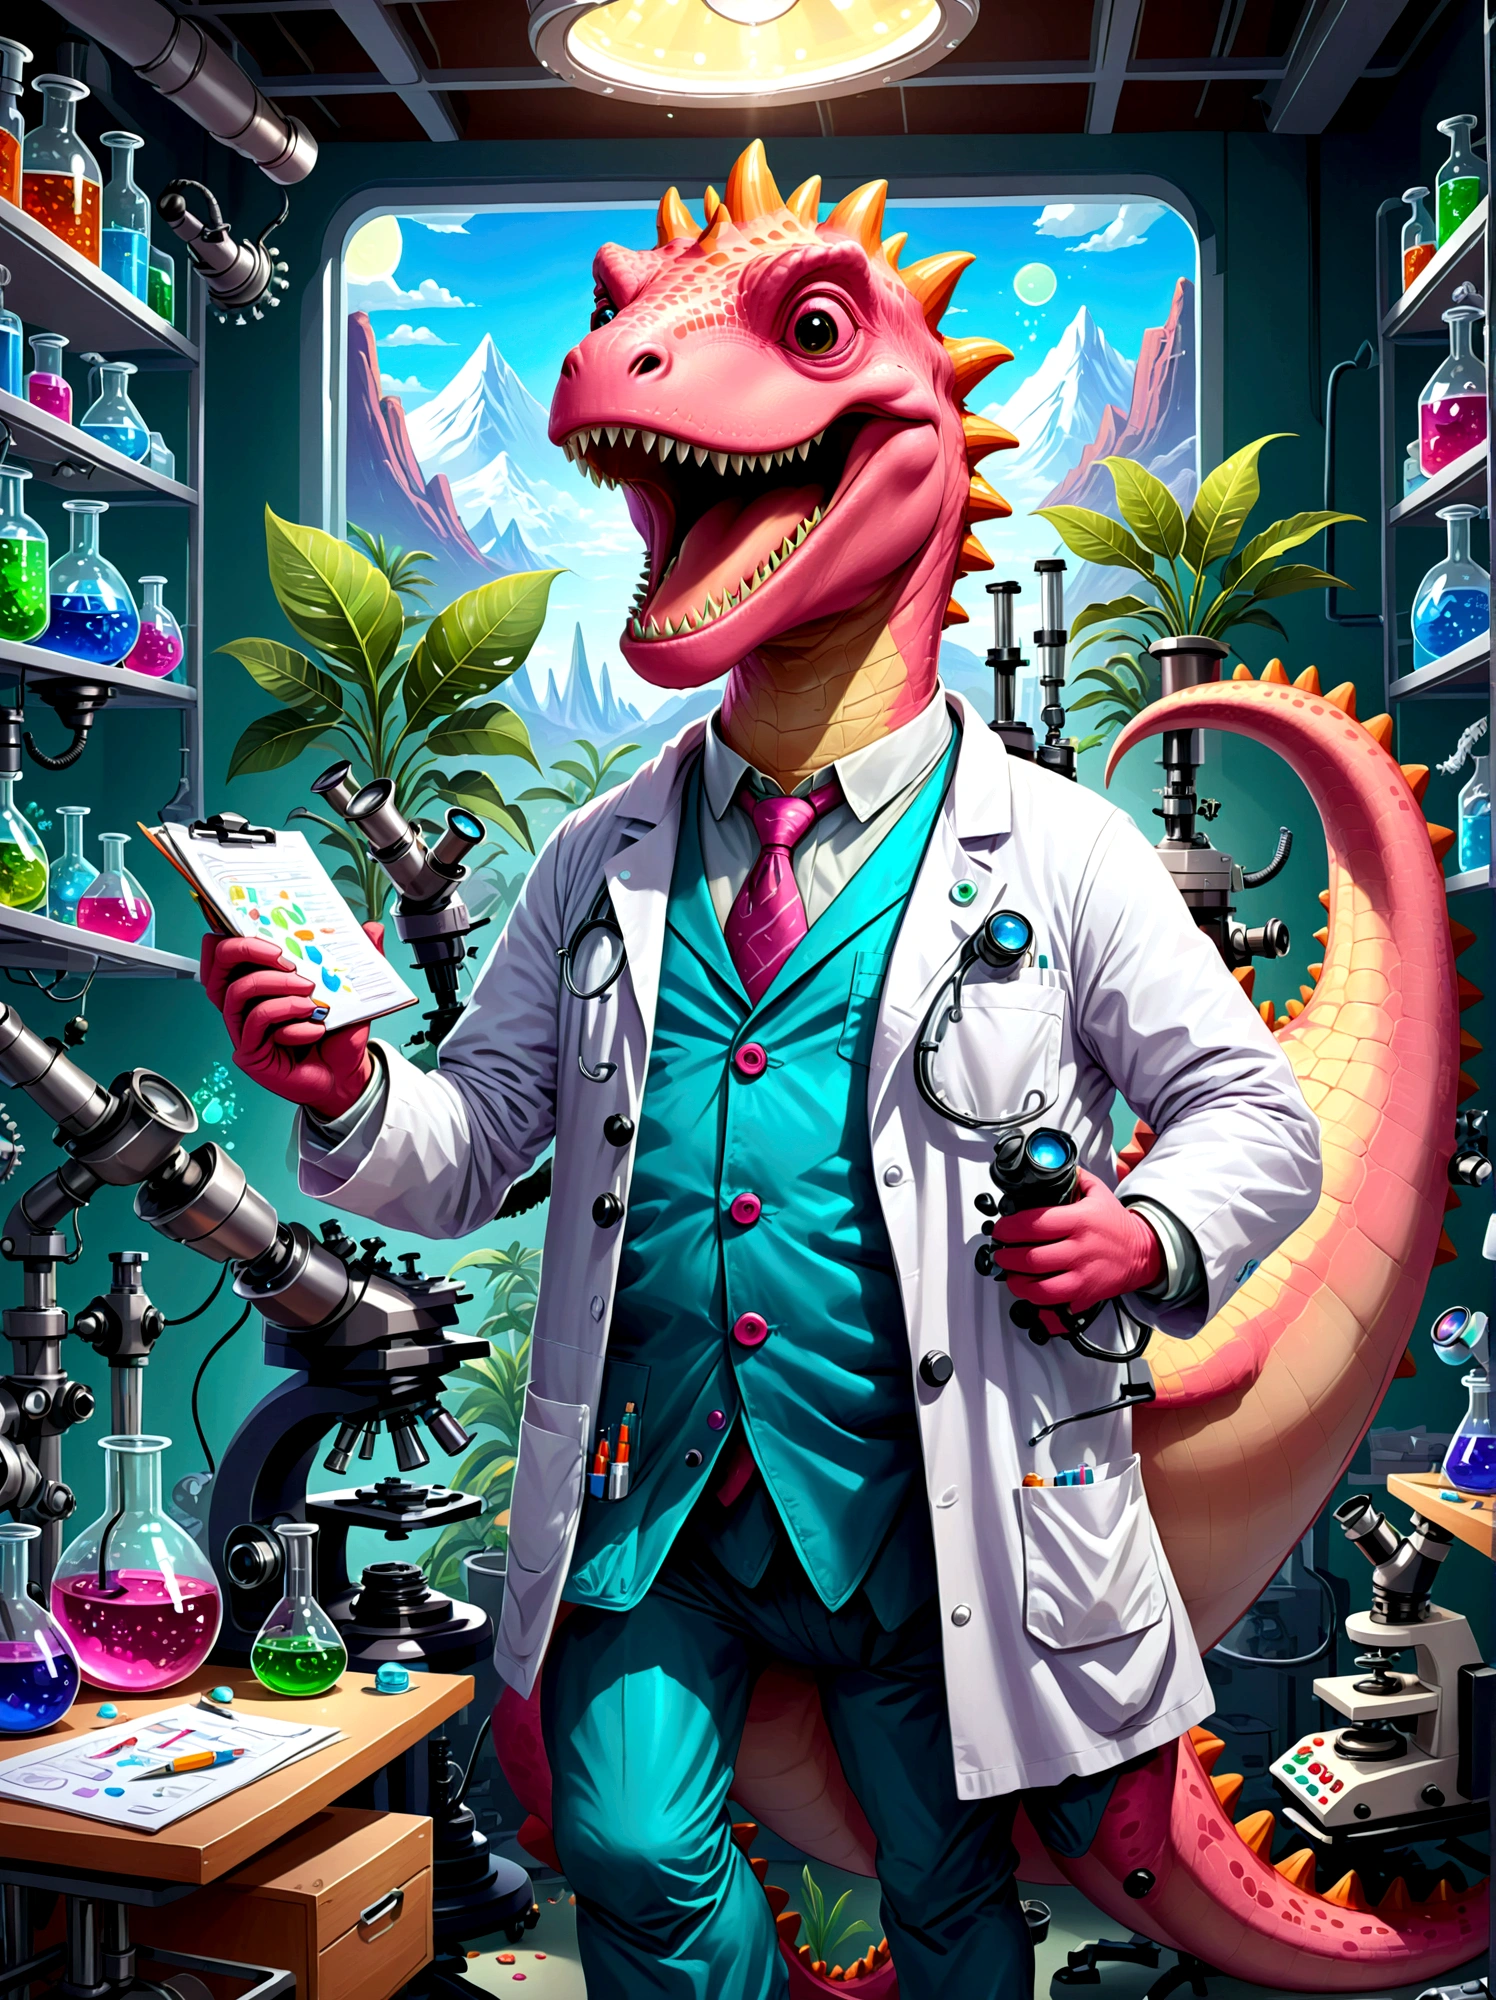 A pink dinosaur character with a broad, toothy smile, dressed as a researcher, They're in a lab, surrounded by scientific equipment like microscopes, beakers, charts and graphs. The dinosaur is wearing a lab coat, eye protection, and holds a clipboard in its hand, Papers are strewn about, indicating a busy work day, The lab setting is filled with light coming from fluorescent lamps overhead, Illustrate this in a cartoon style